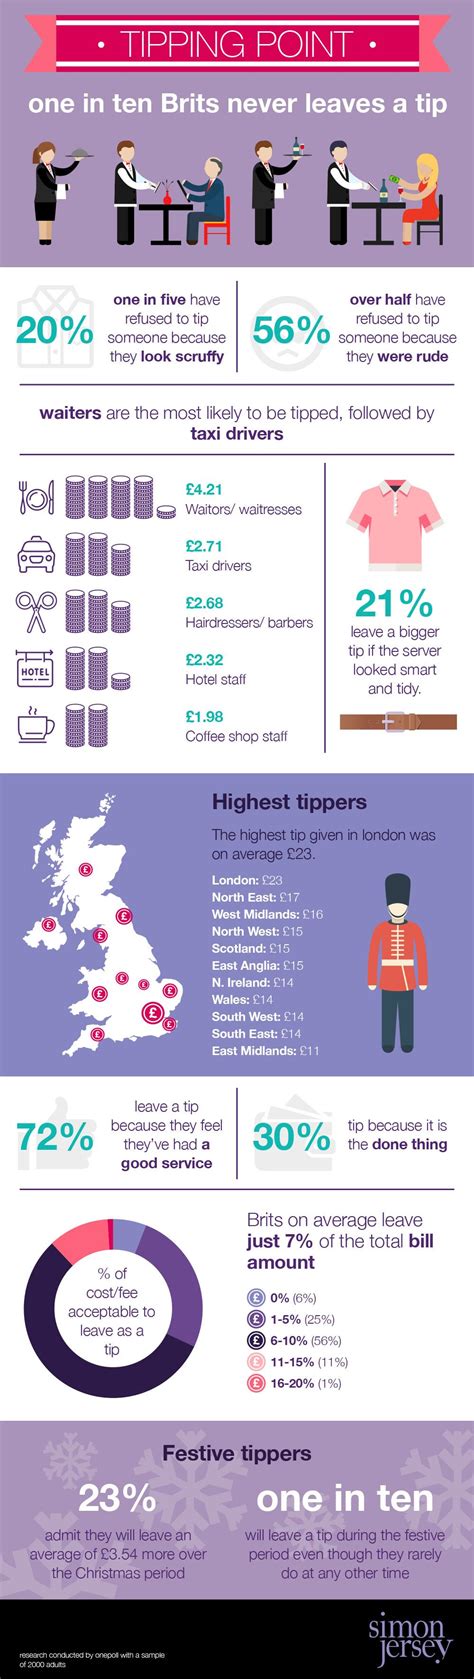 Tipping Infographic Simon Jersey Blog